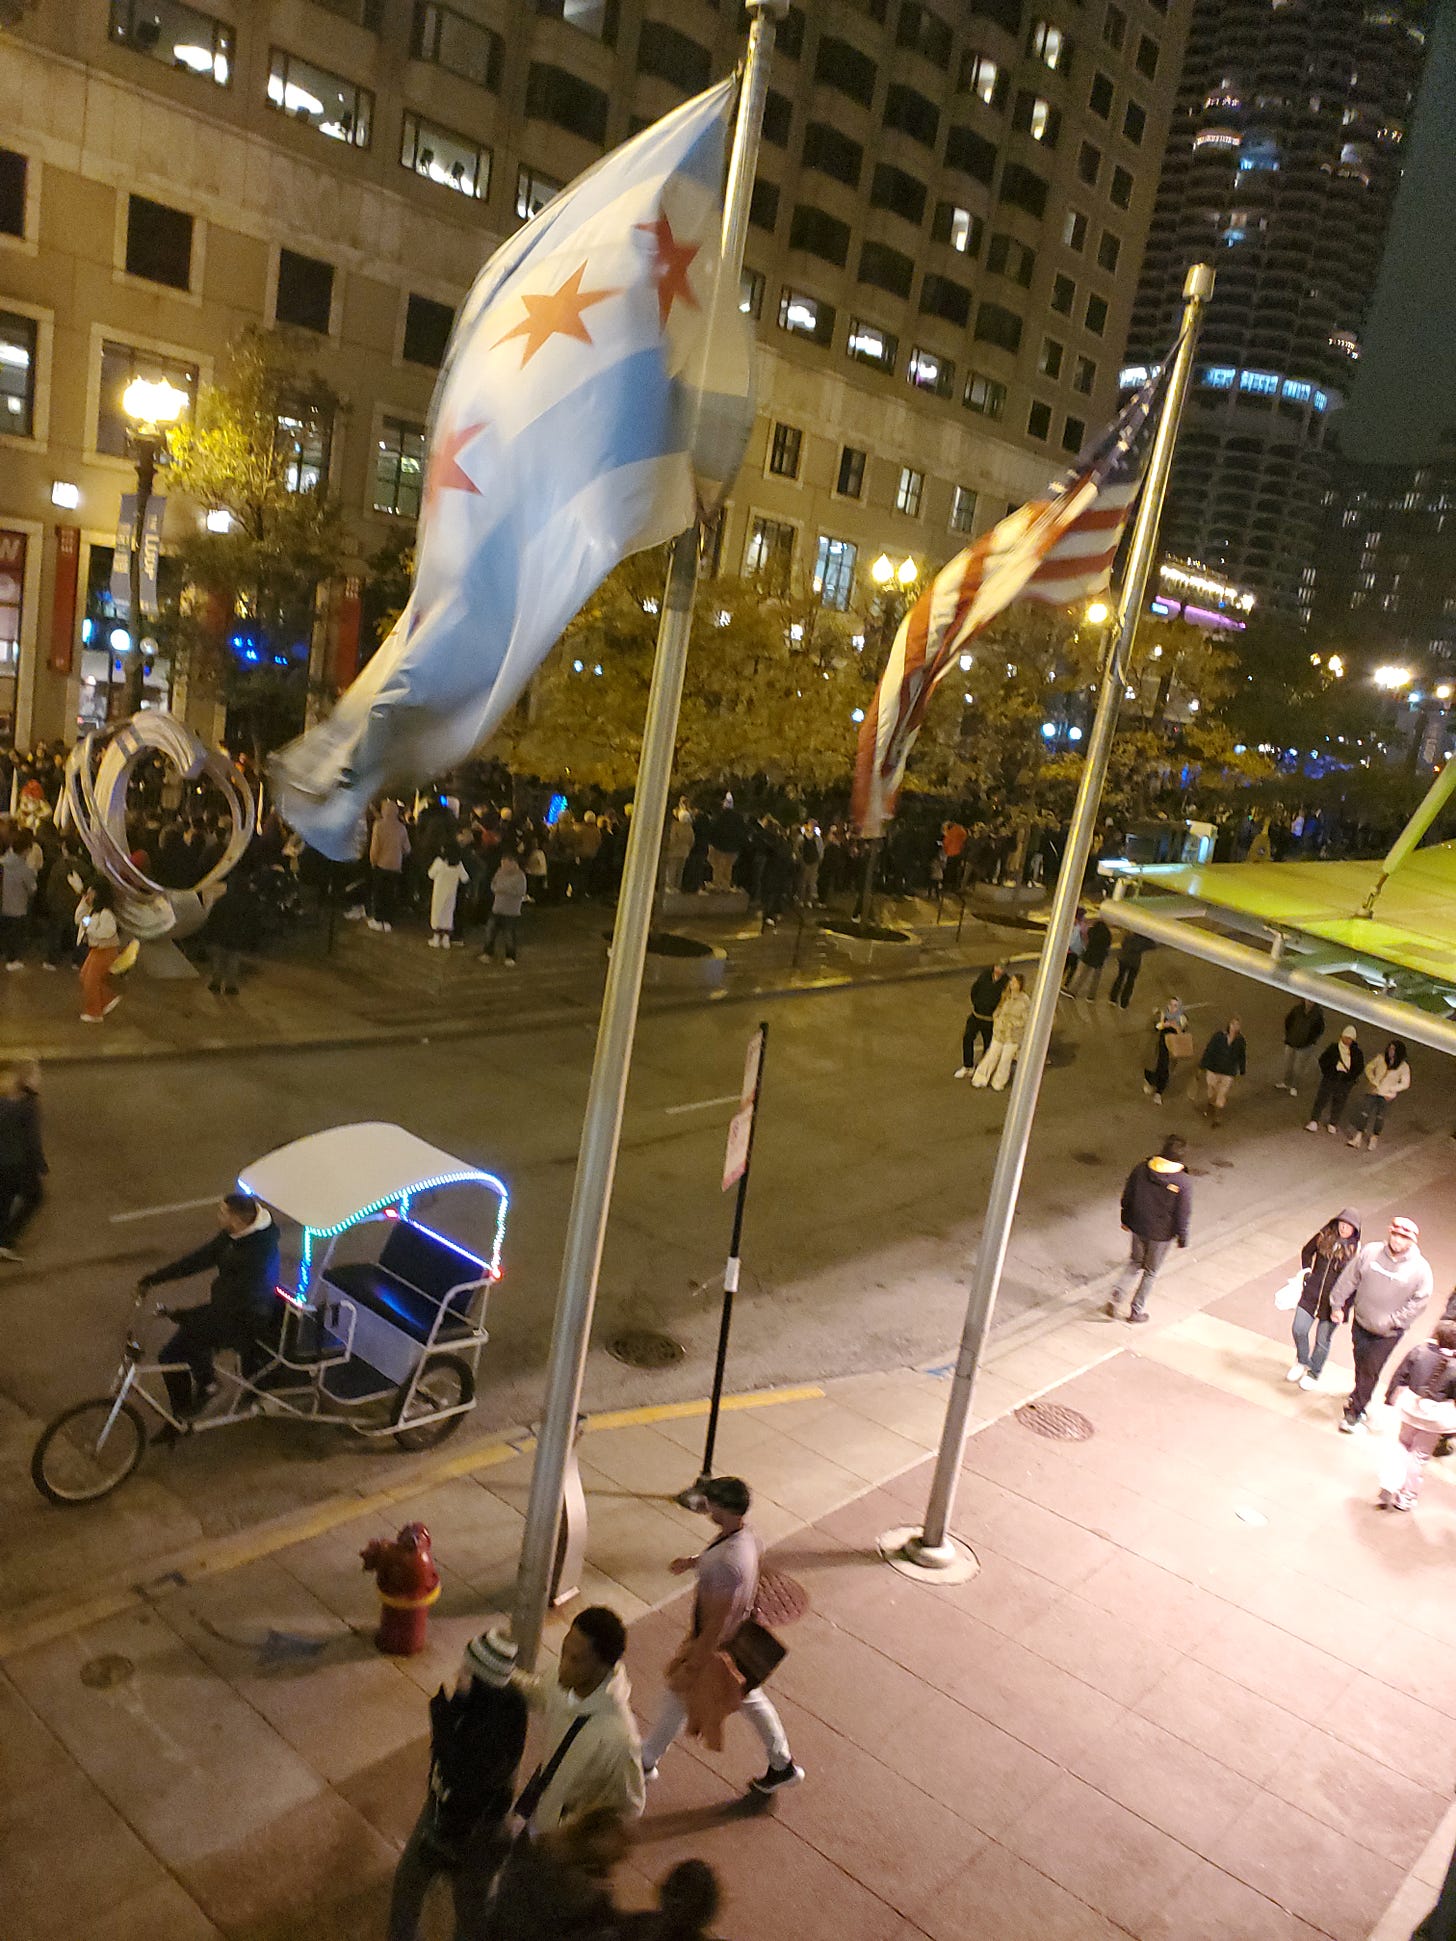 Waving Chicago and American flags, a cycle taxi, and parade-goers